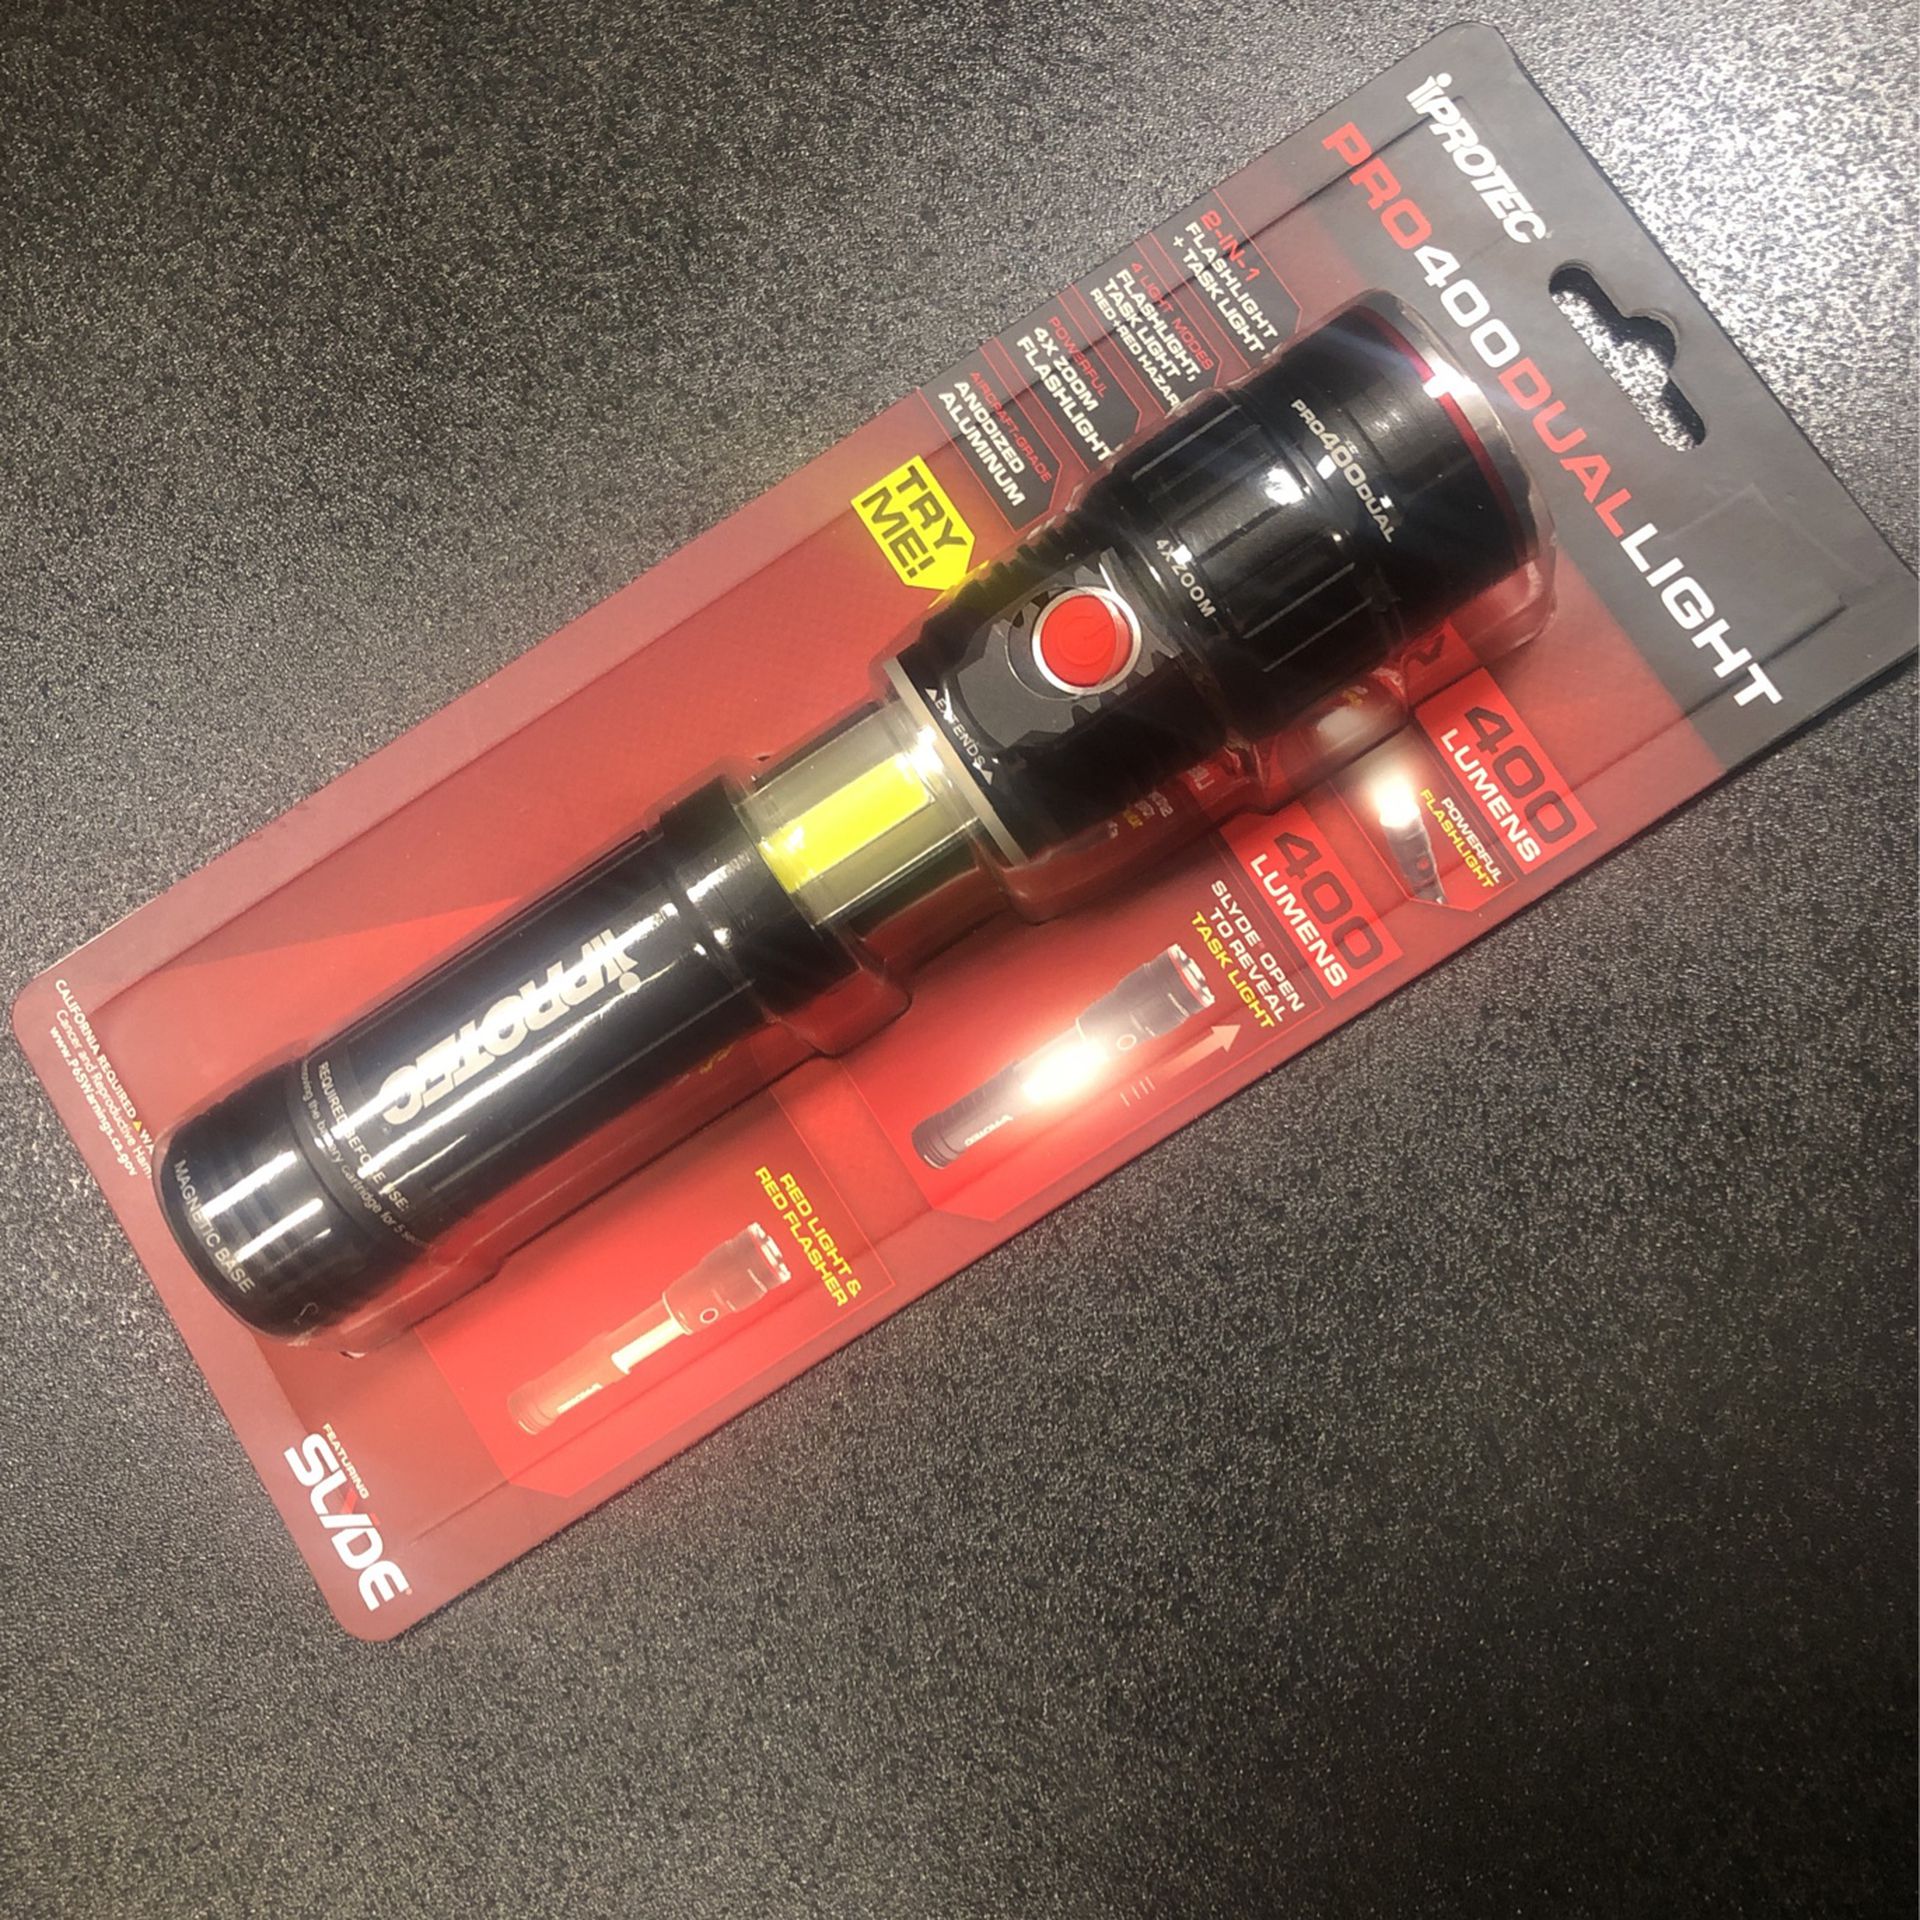 Brand New  Unopen  Pack   Batteries Included  Flashlight  400 LUMENS $25  Obo  